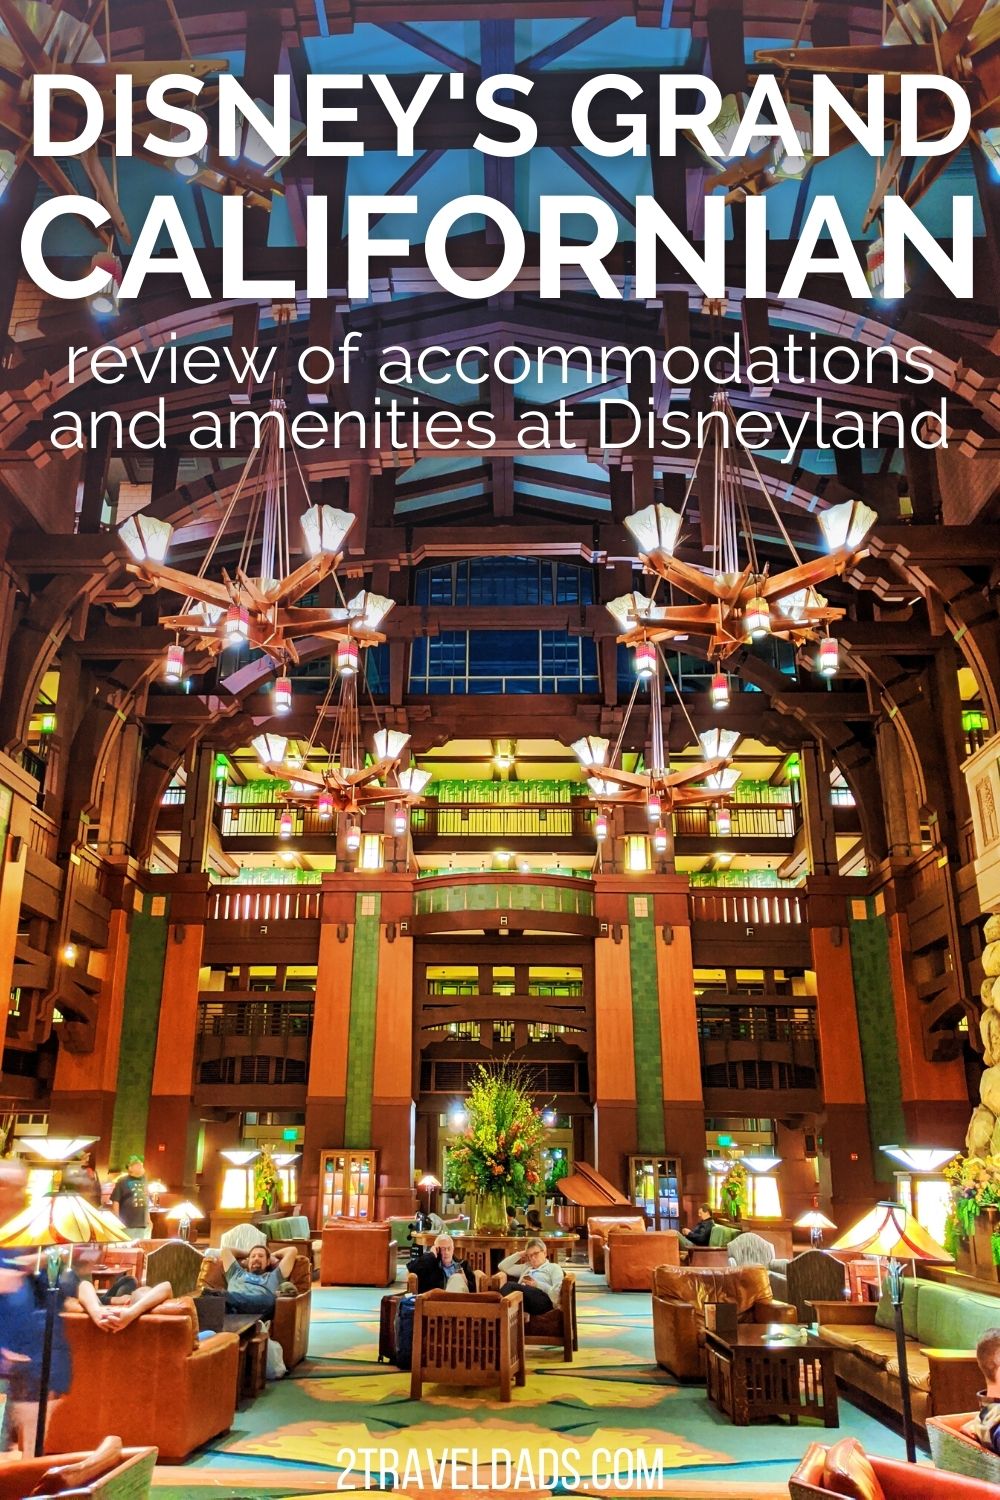 Disney's Grand Californian Hotel is the closest option to Disneyland and California Adventure. This review has all the details of staying at the Grand Californian, amenities and tips for planning the best Disneyland trip.